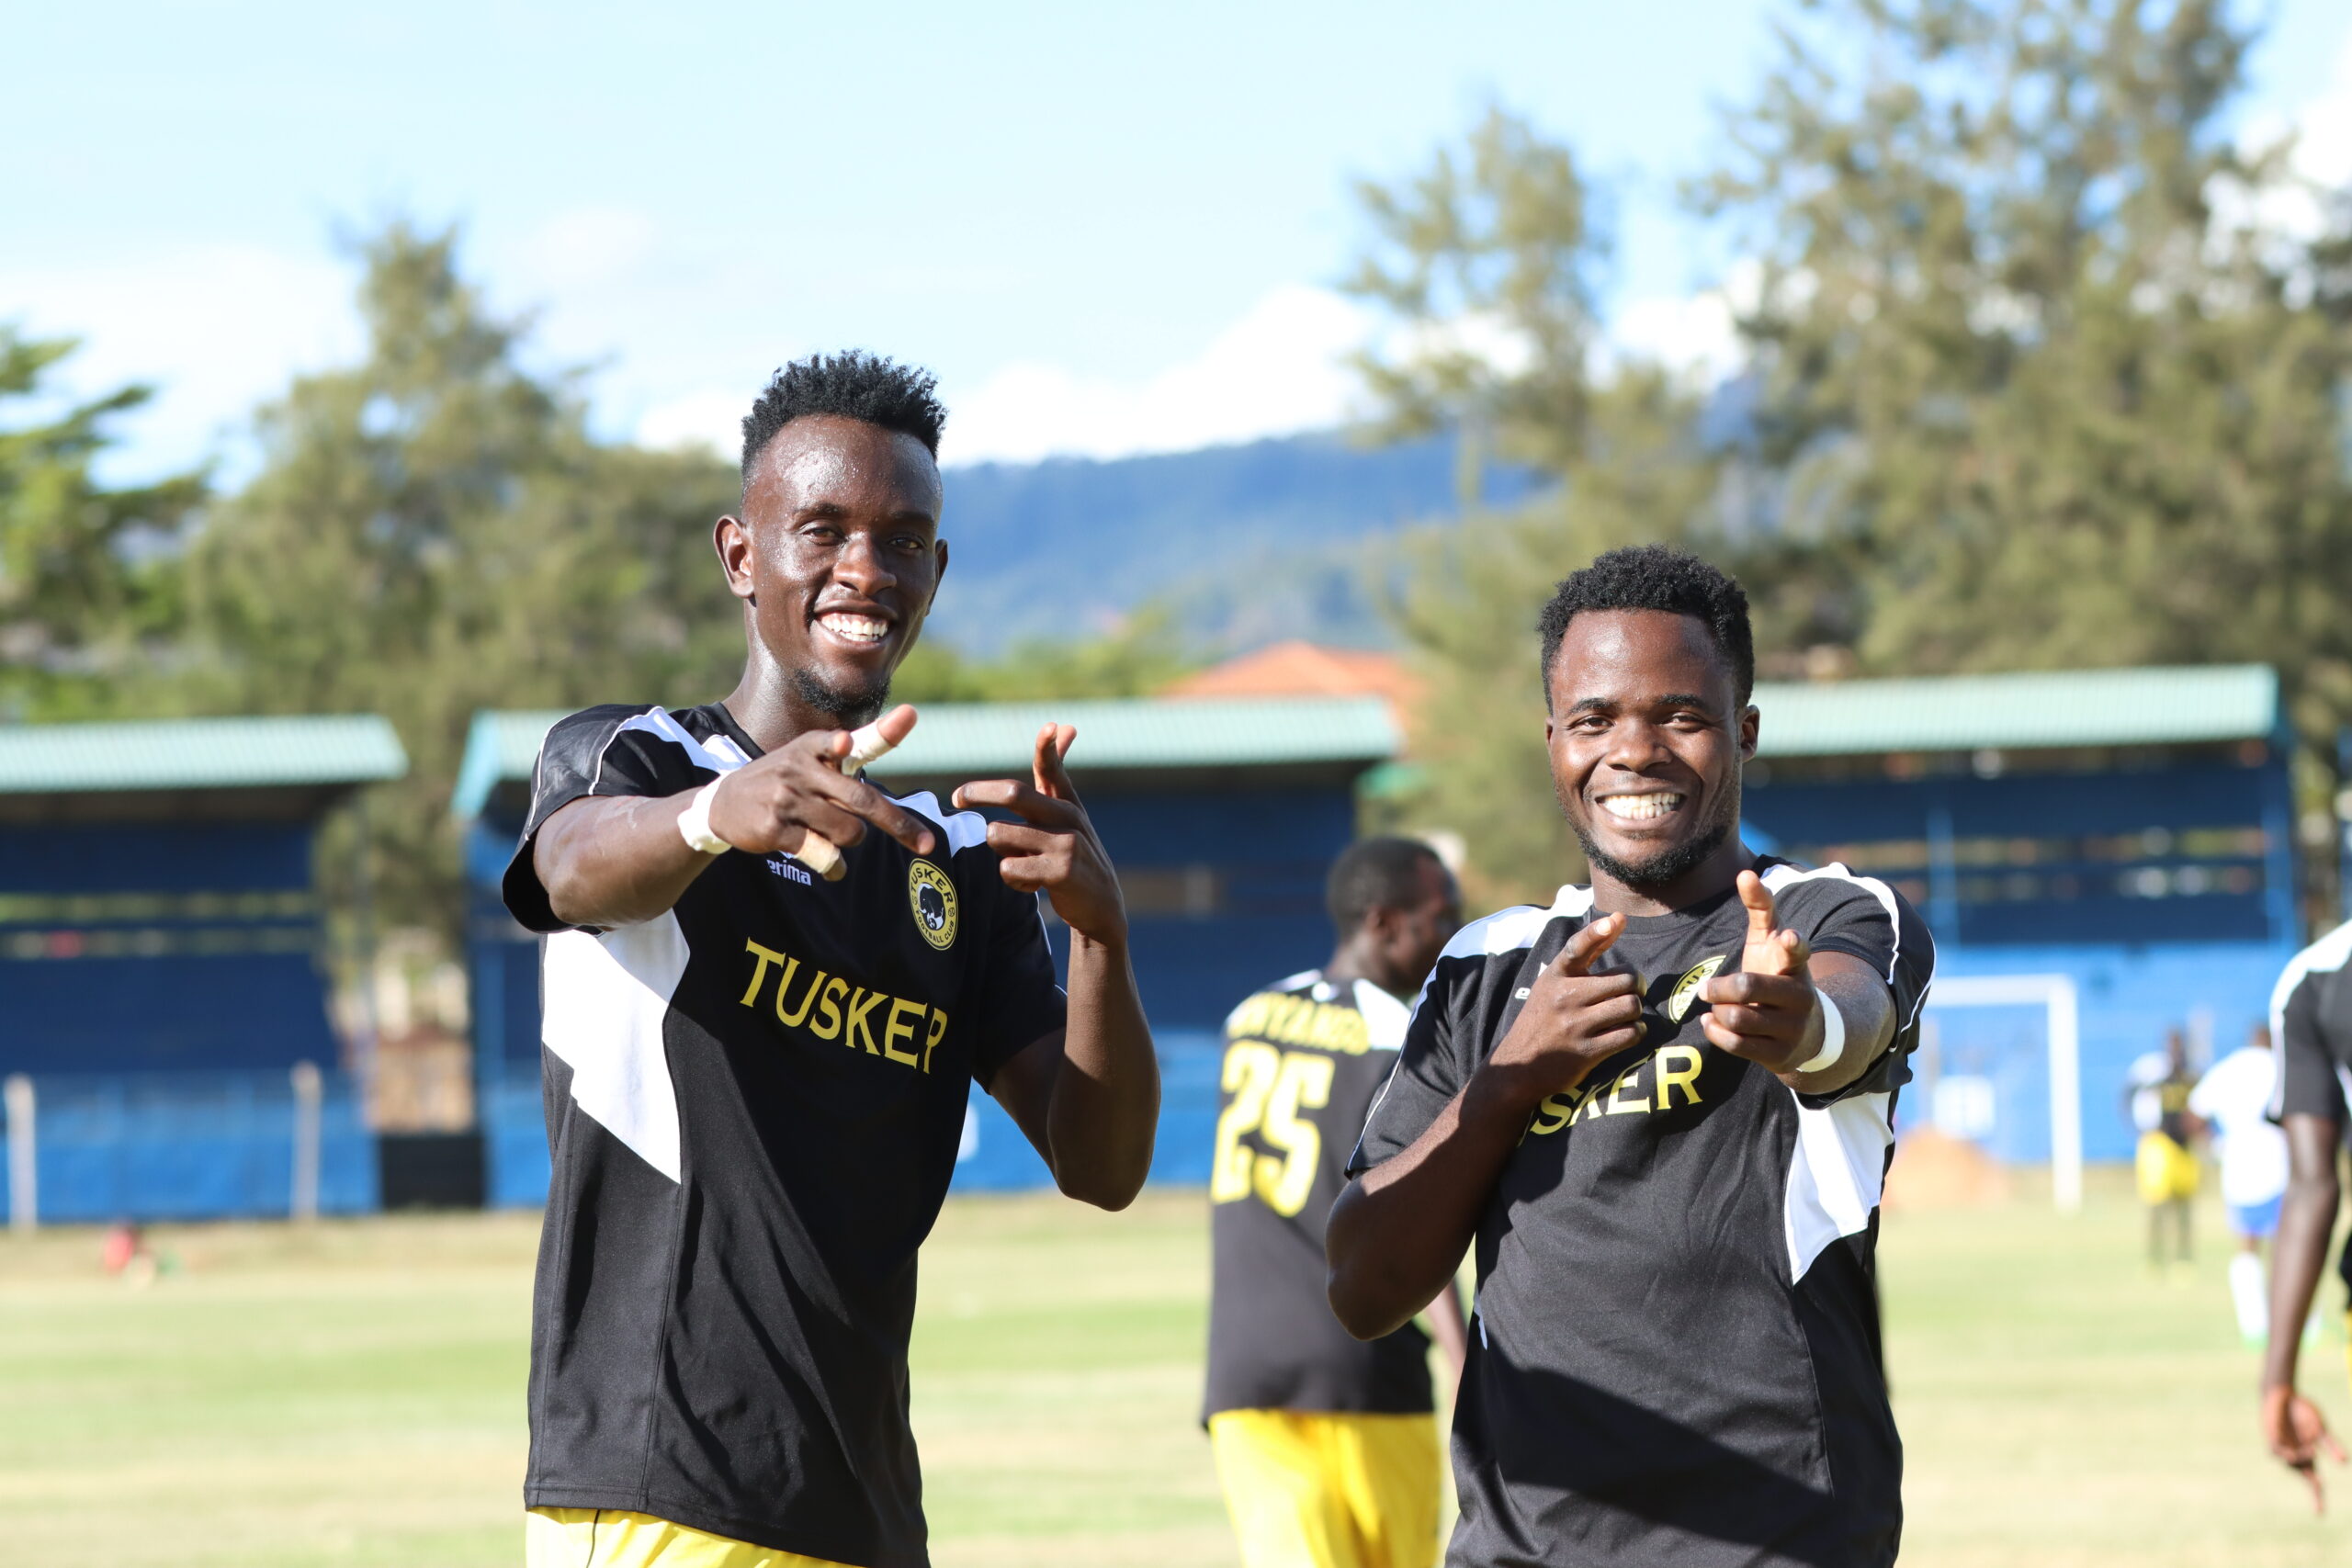 Tusker FC players Fabien Adikiny and James Kibande celebrate after the win against Sofapaka